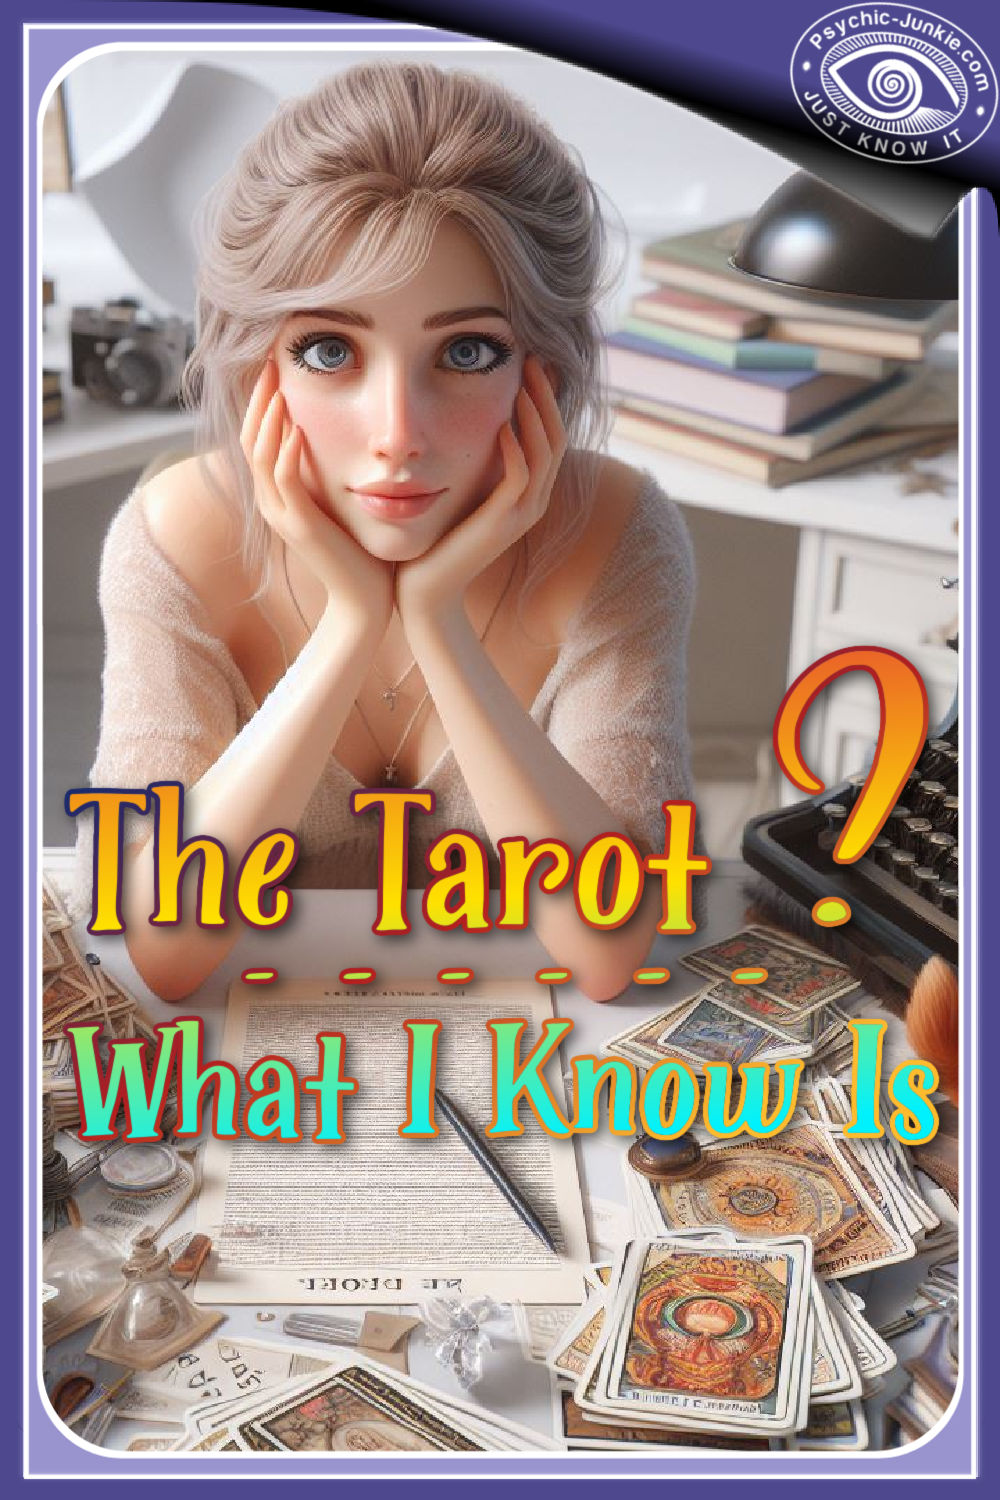 Write What You Know About The Tarot